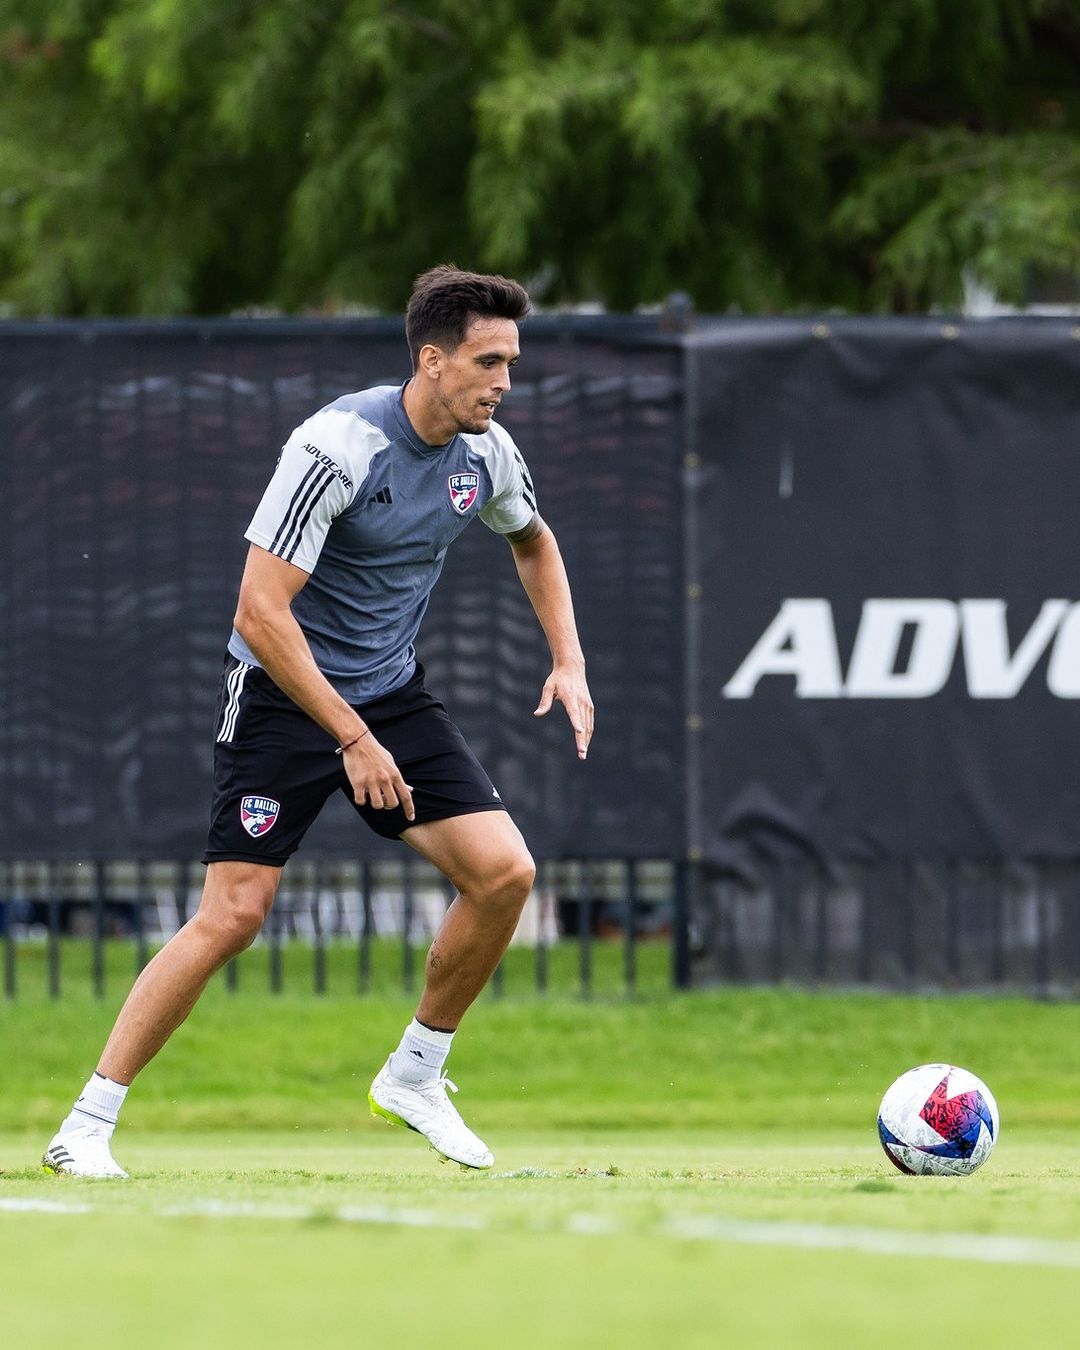 PHOTOS GALLERY: Training Sessions of Inter Miami and FC Dallas Ahead of Tomorrow's Official Match